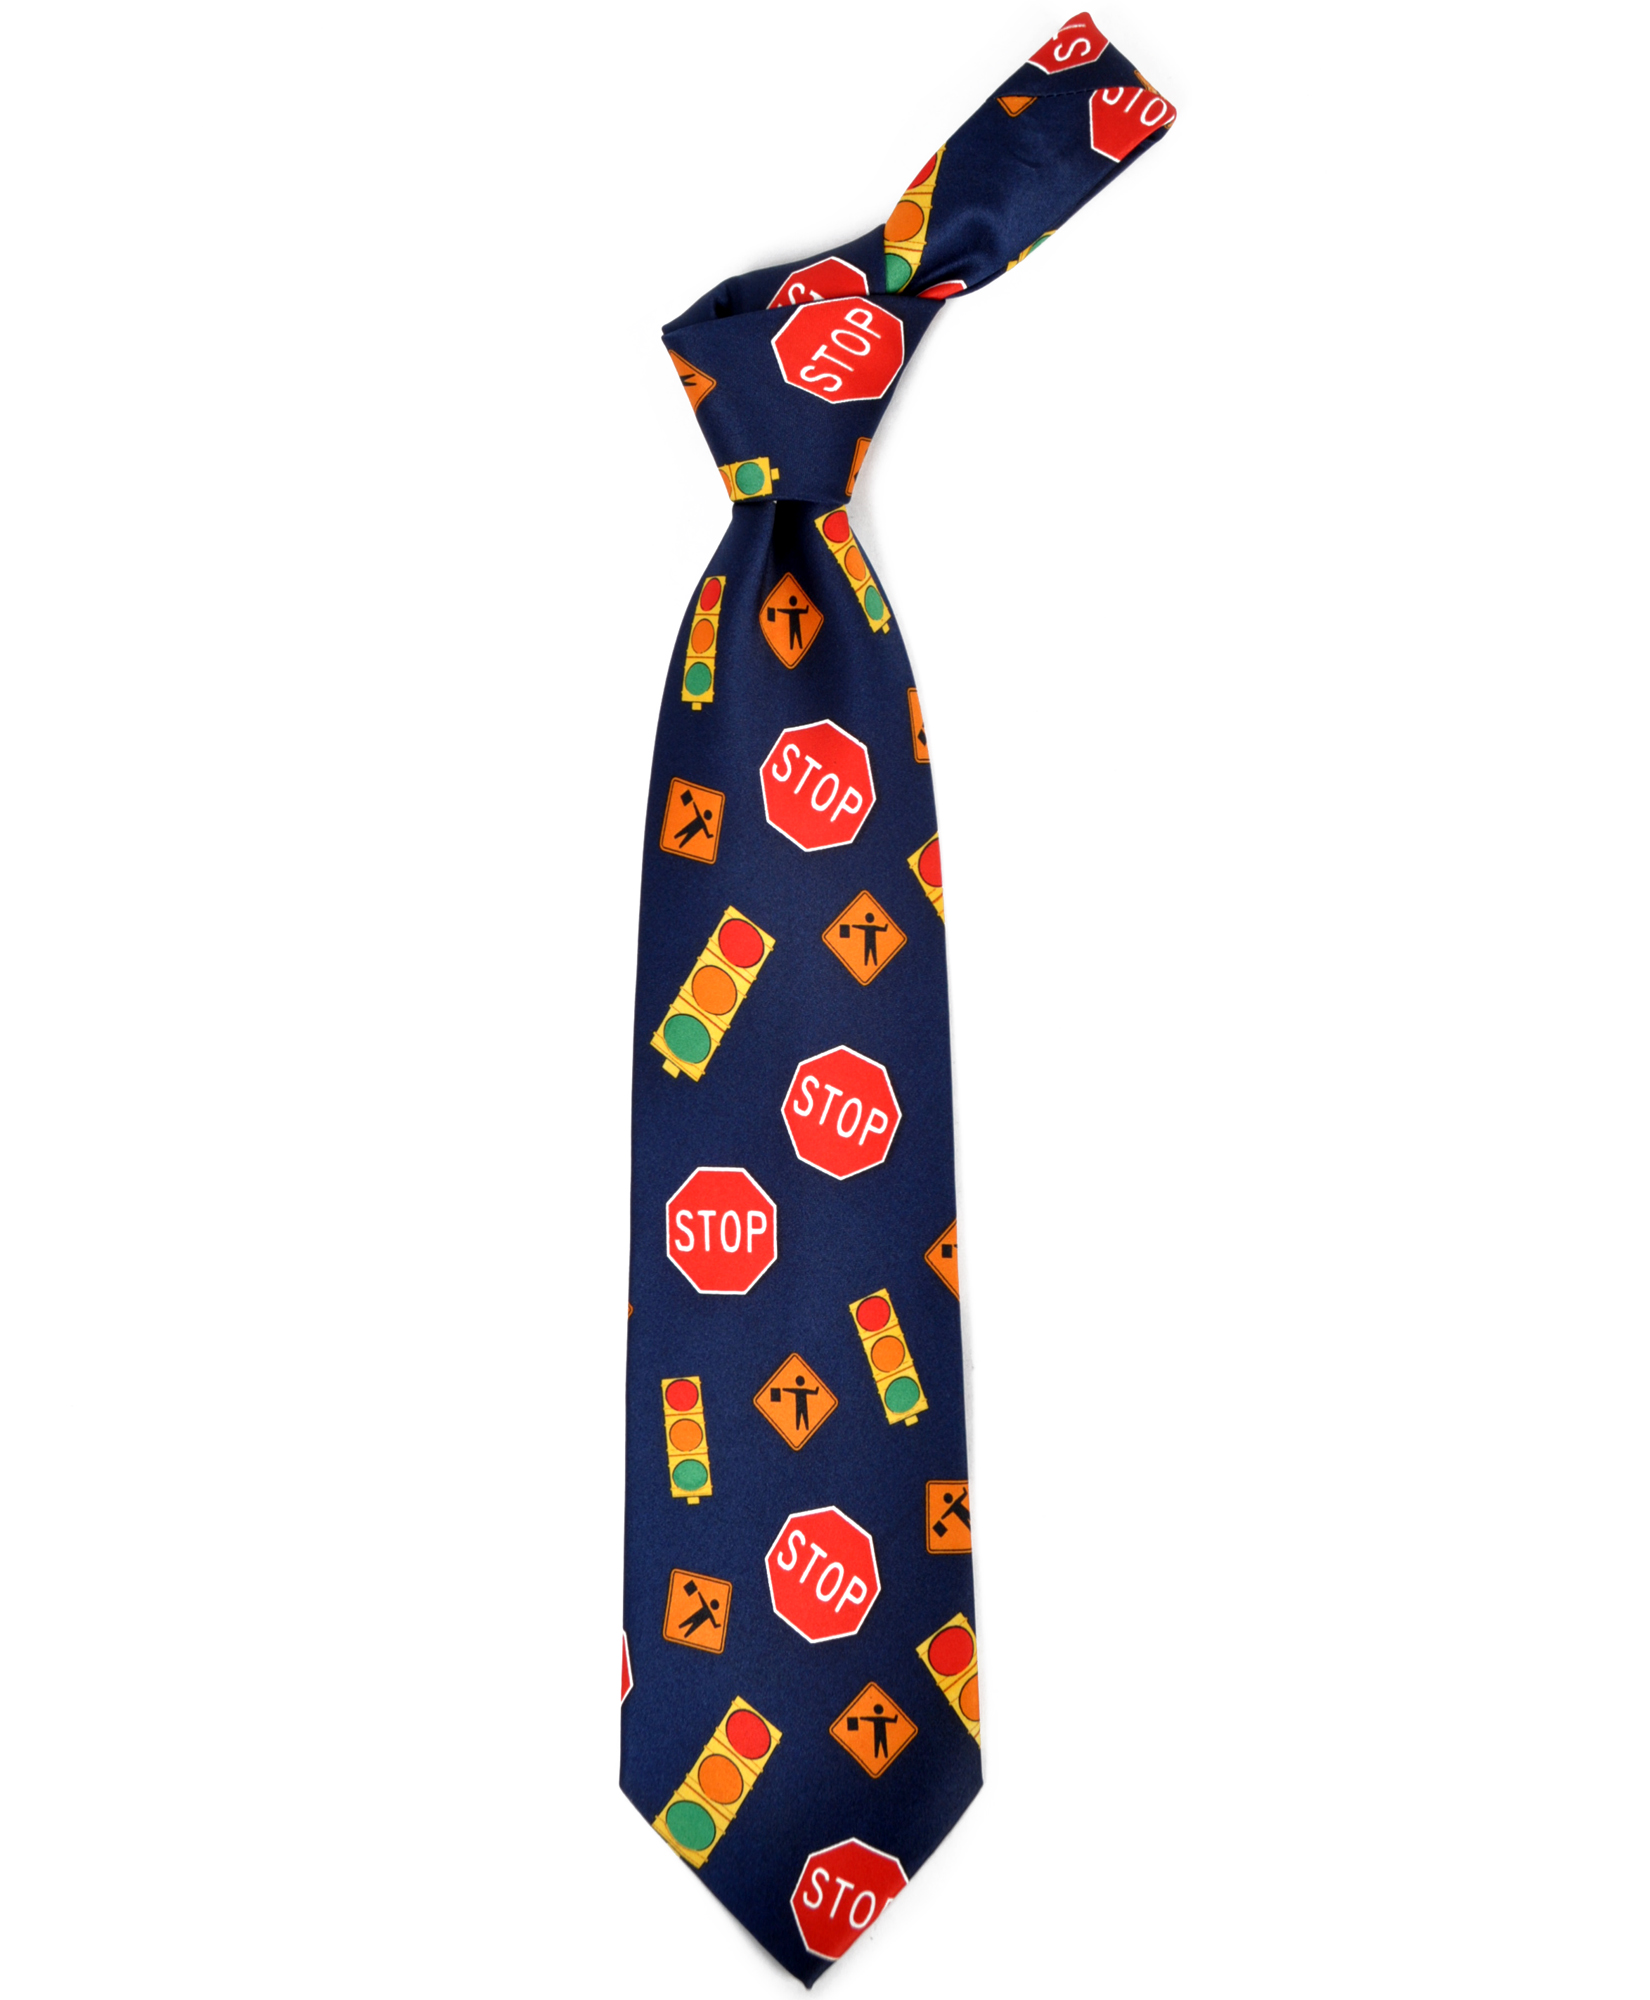 "Traffic Signs" Novelty Tie